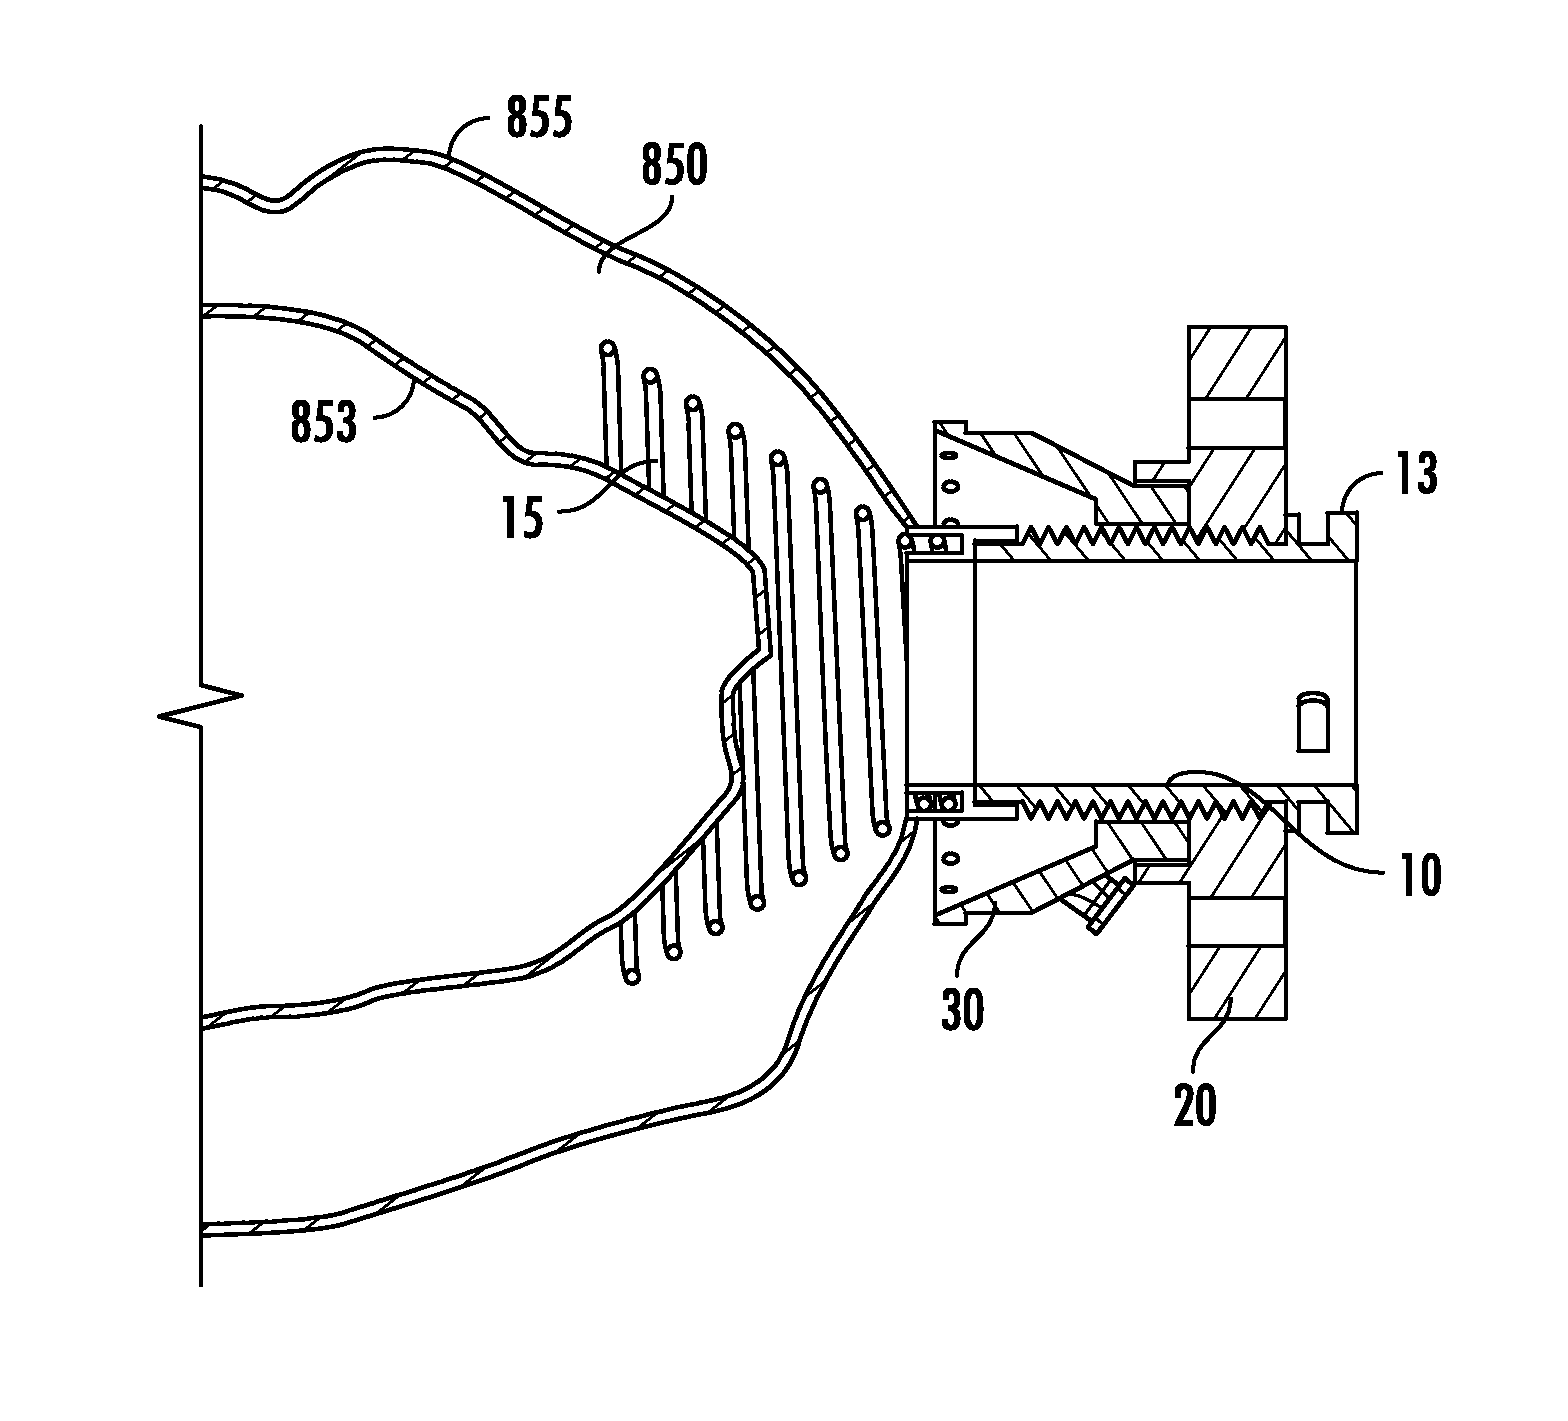 Systems for implanting and using a conduit within a tissue wall